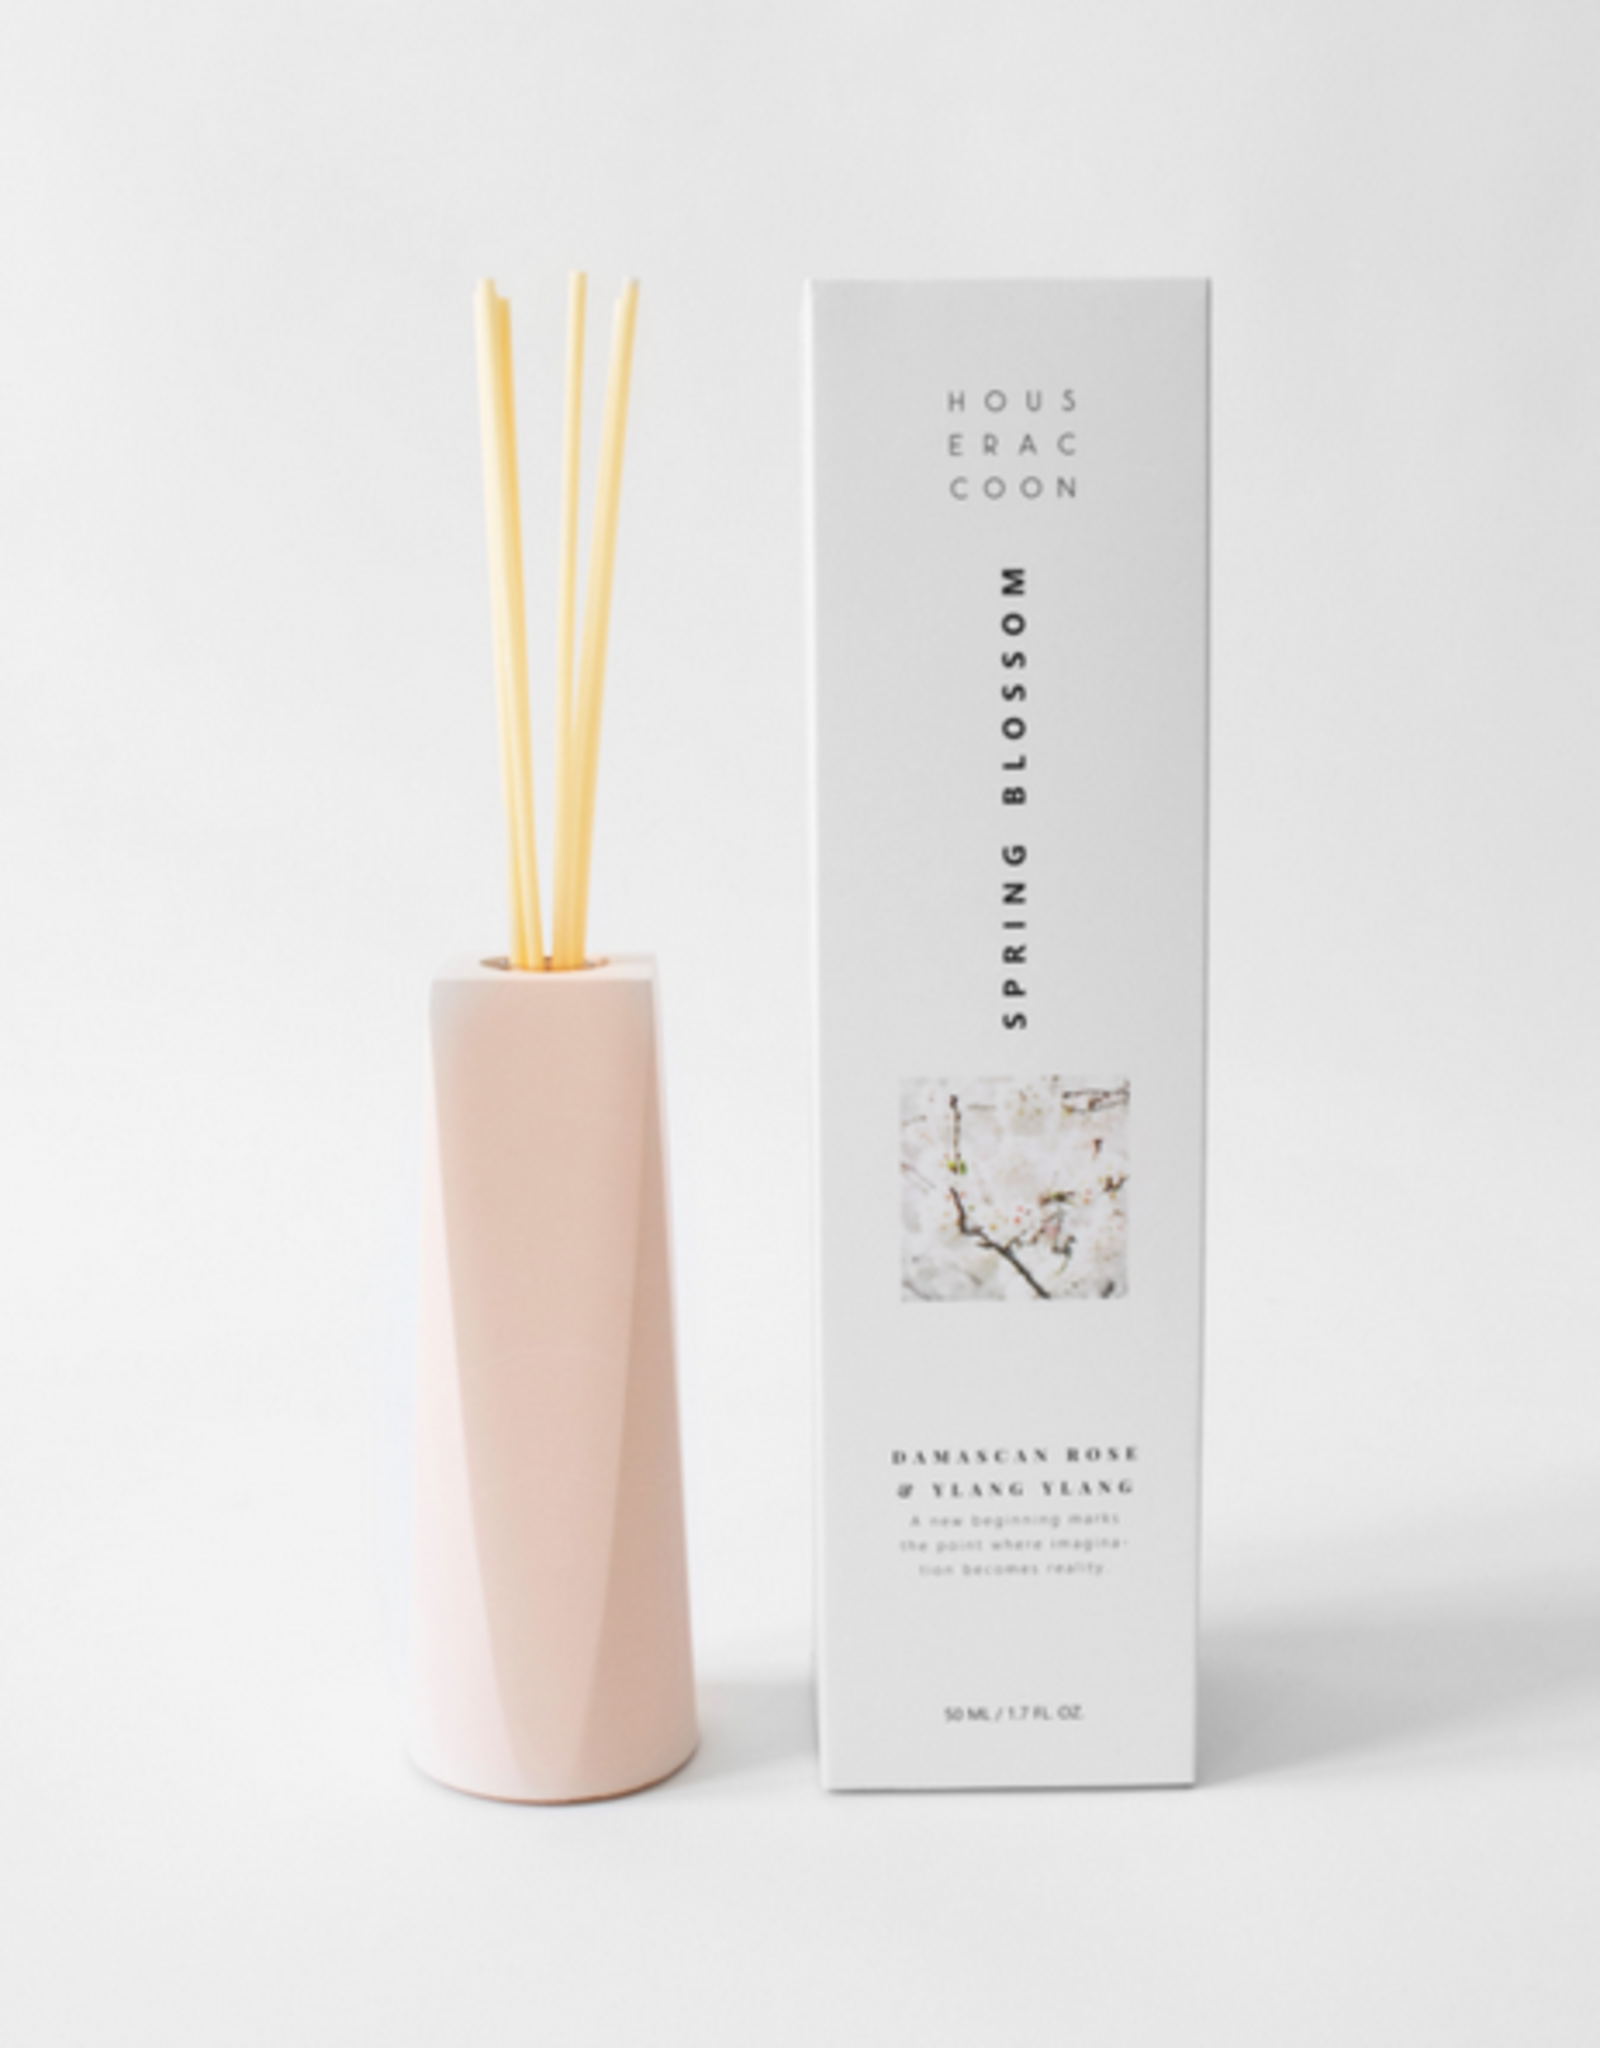 House Raccoon House Raccoon - Amava Scent diffuser - Special edition - Millenial pink - Spring Blossom